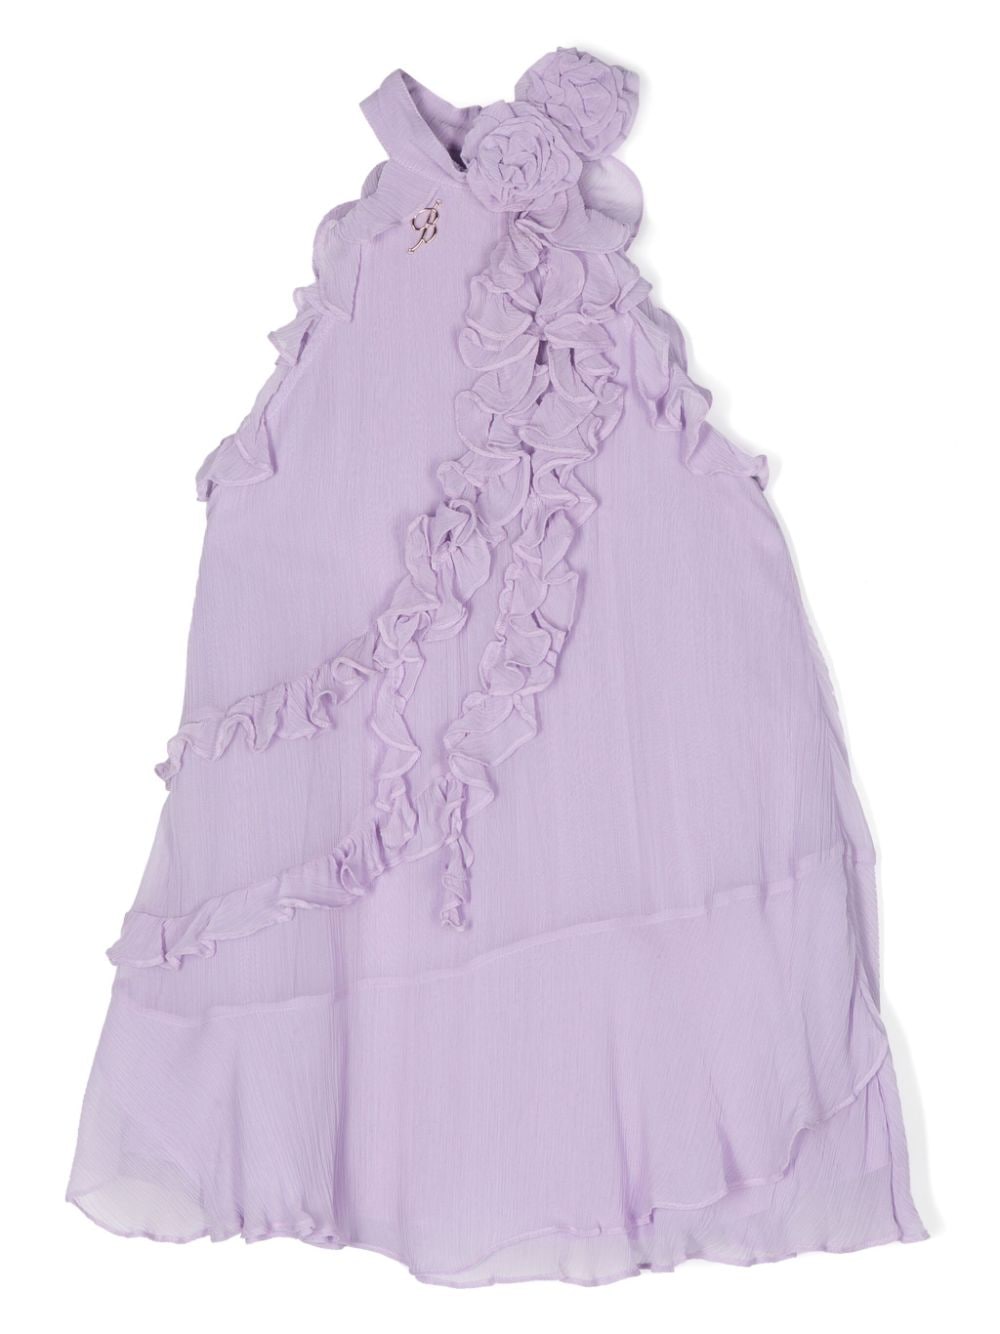 Lilac crepe dress for girls